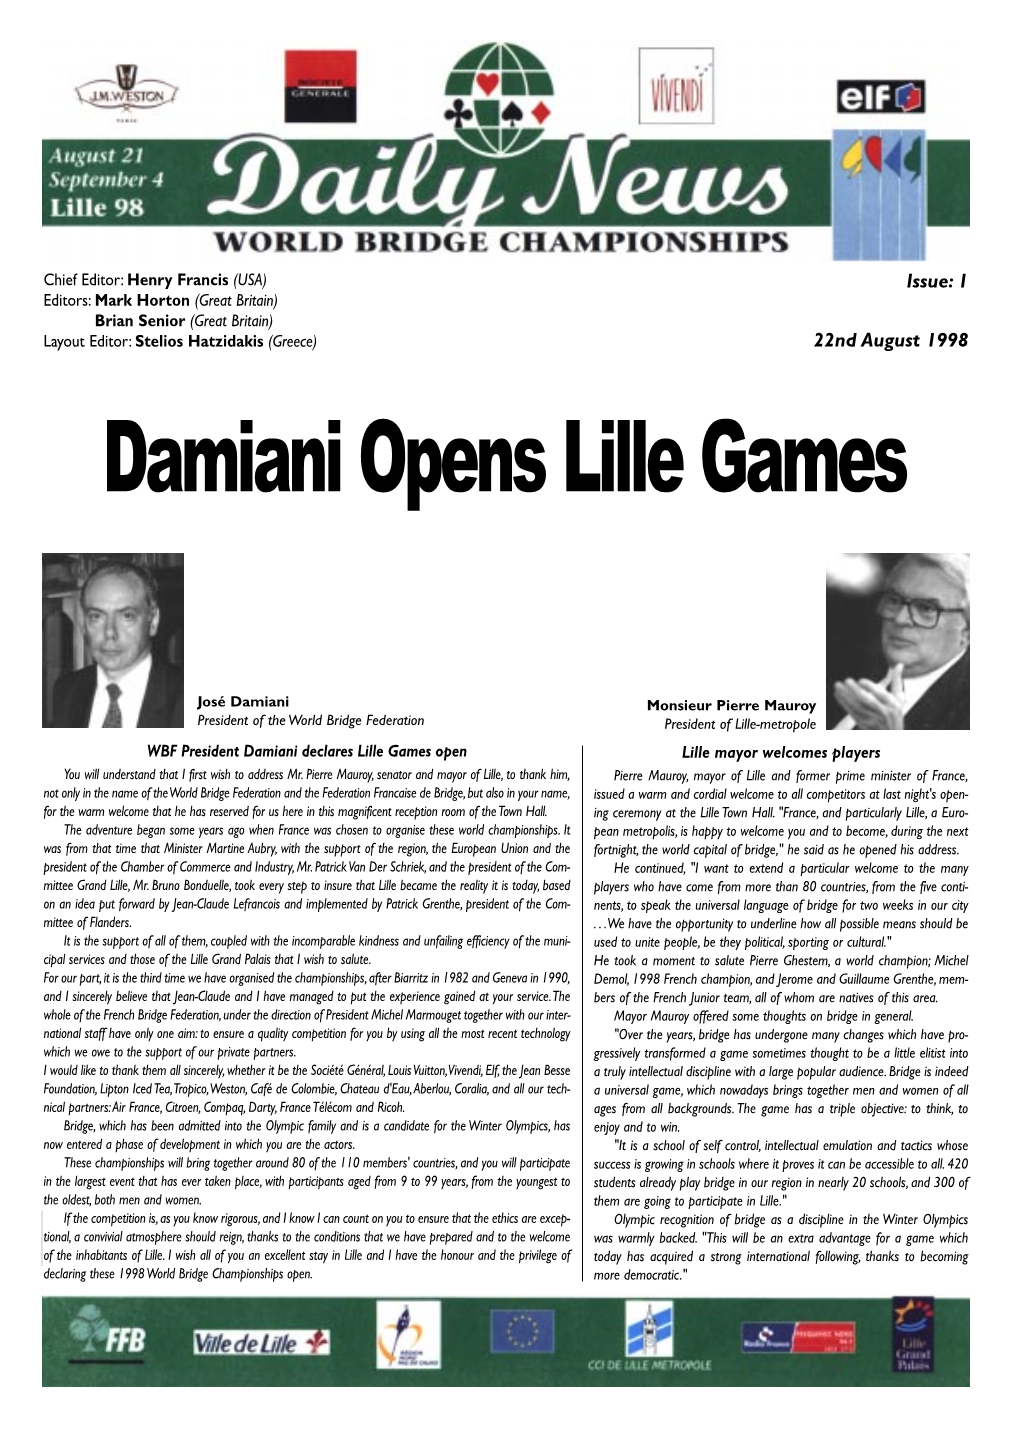 Damiani Opens Lille Games